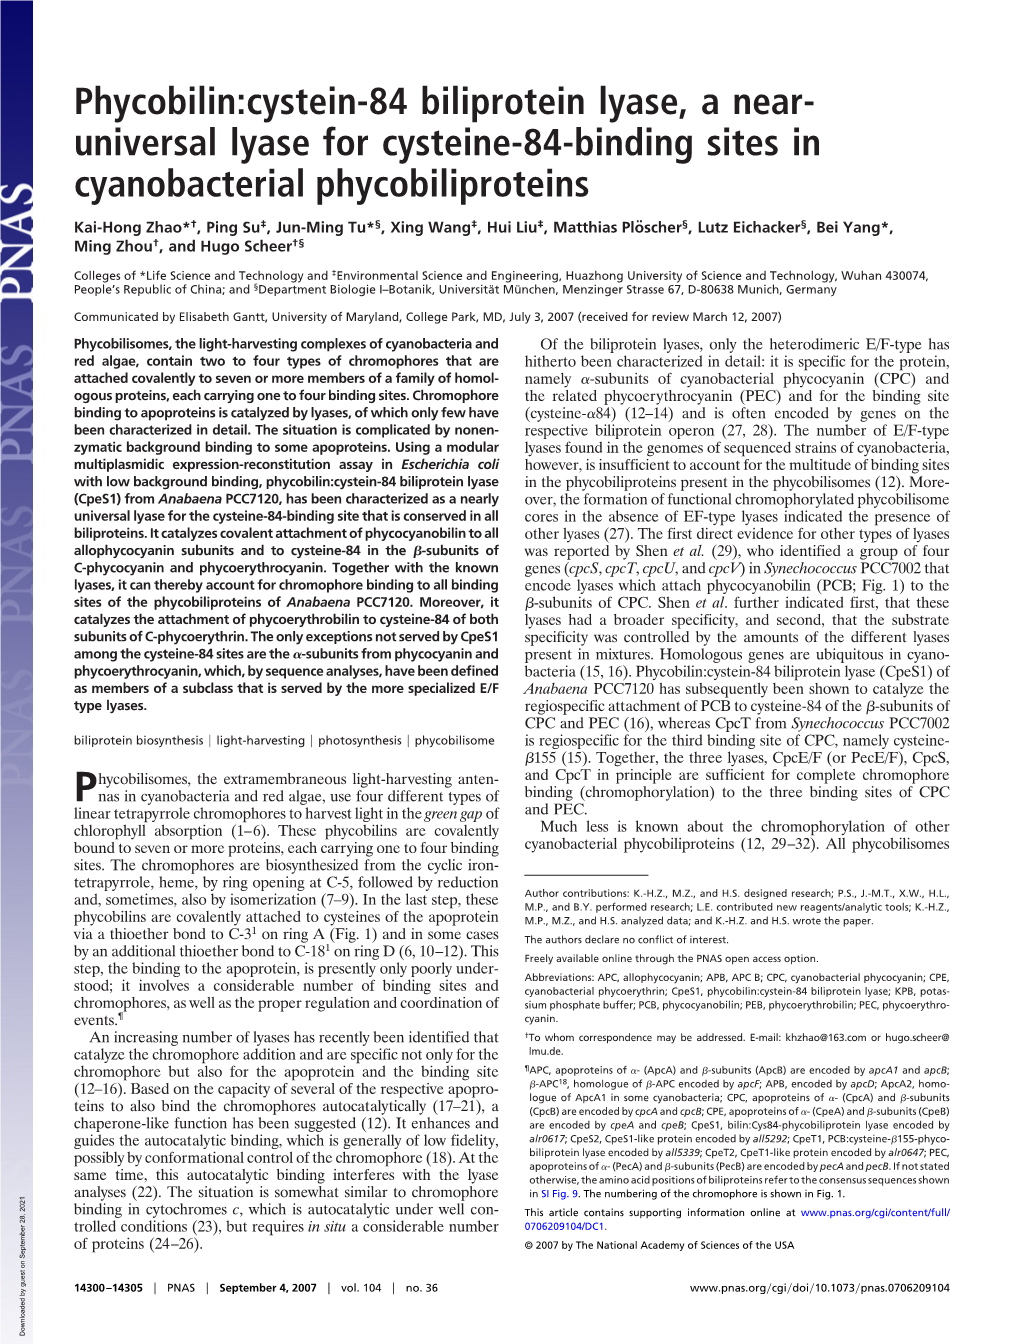 Phycobilin:Cystein-84 Biliprotein Lyase, a Near- Universal Lyase for Cysteine-84-Binding Sites in Cyanobacterial Phycobiliproteins